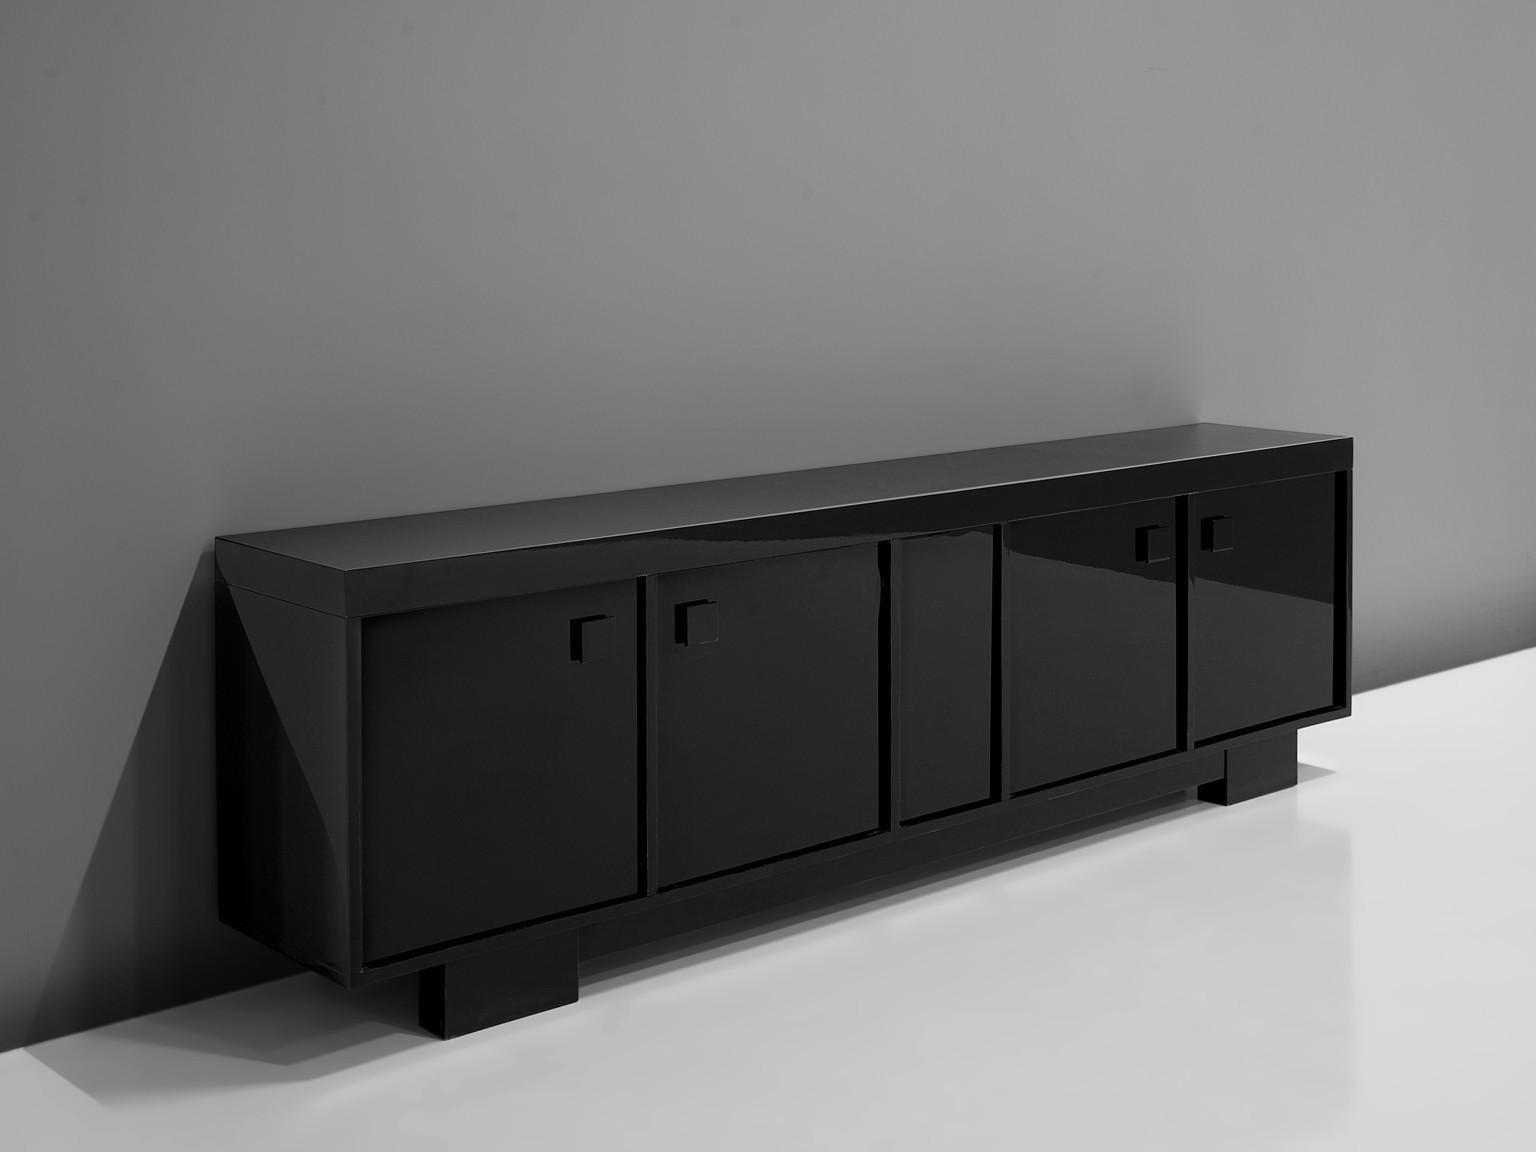 Emiel Veranneman, sideboard, high gloss lacquered wood, Belgium, 1970s

This monumental, black high gloss sideboard features five doors with squared handles. Two big doors are paired at the side and in the middle is another door integrated. The